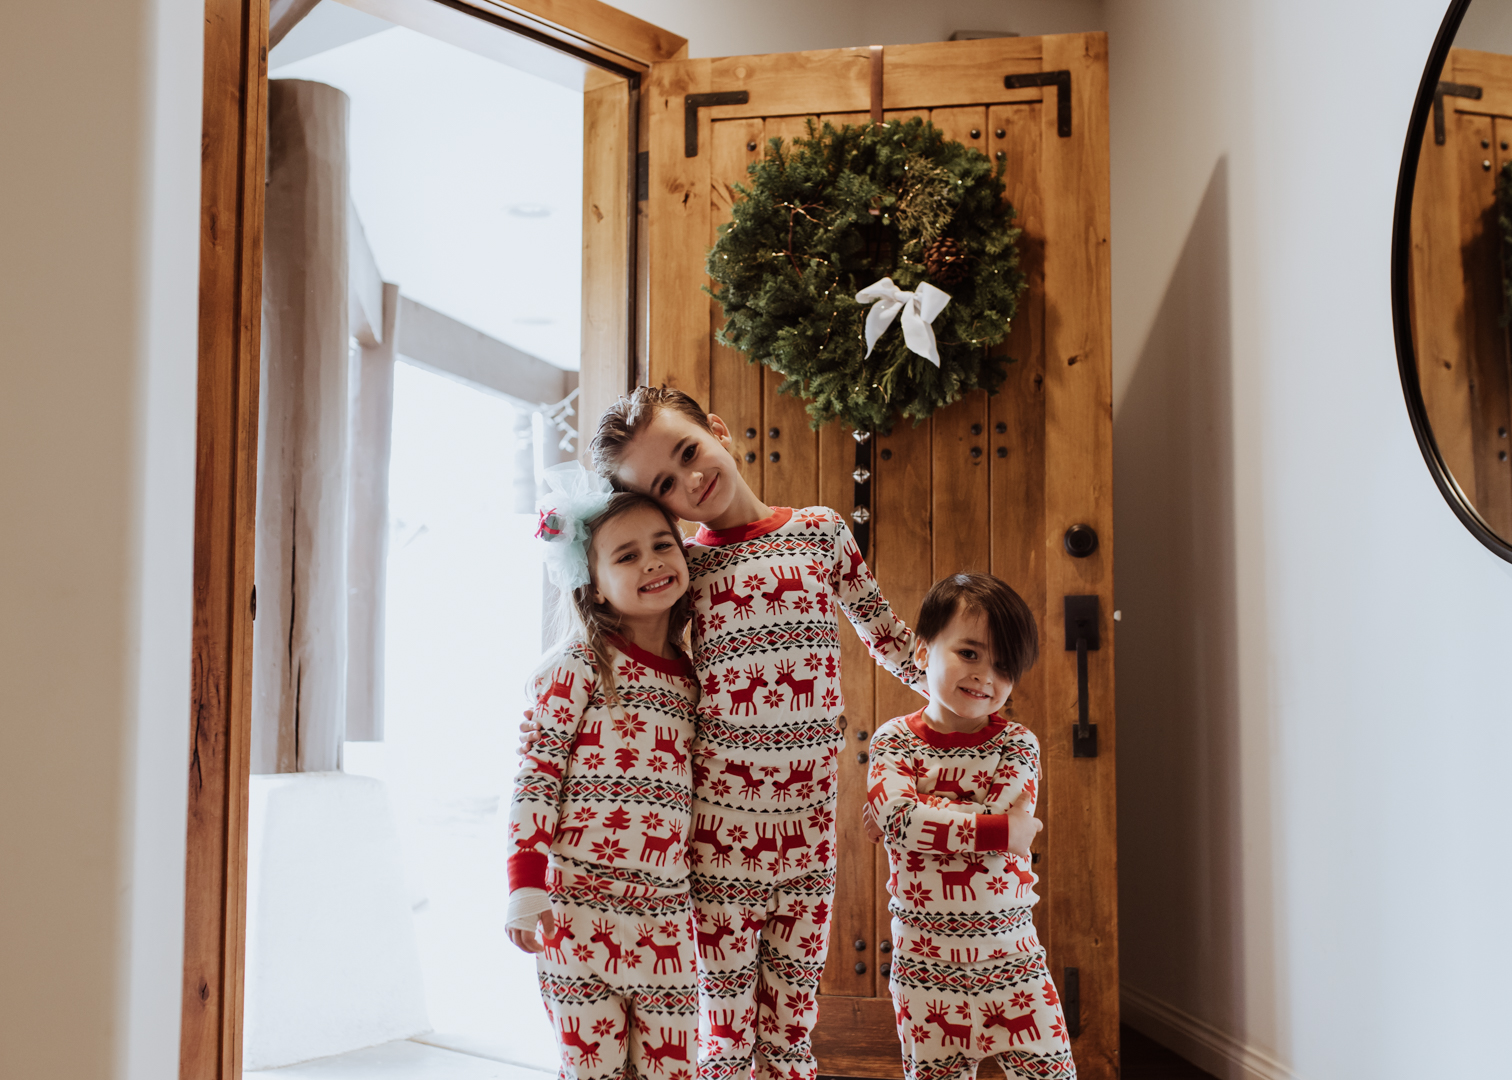 ready for their christmas party guest to arrive! | thelovedesignedlife.com #gingerbreadhouseparty #gingerbread #christmas #christmasjammies #matchingjammies #hannajams